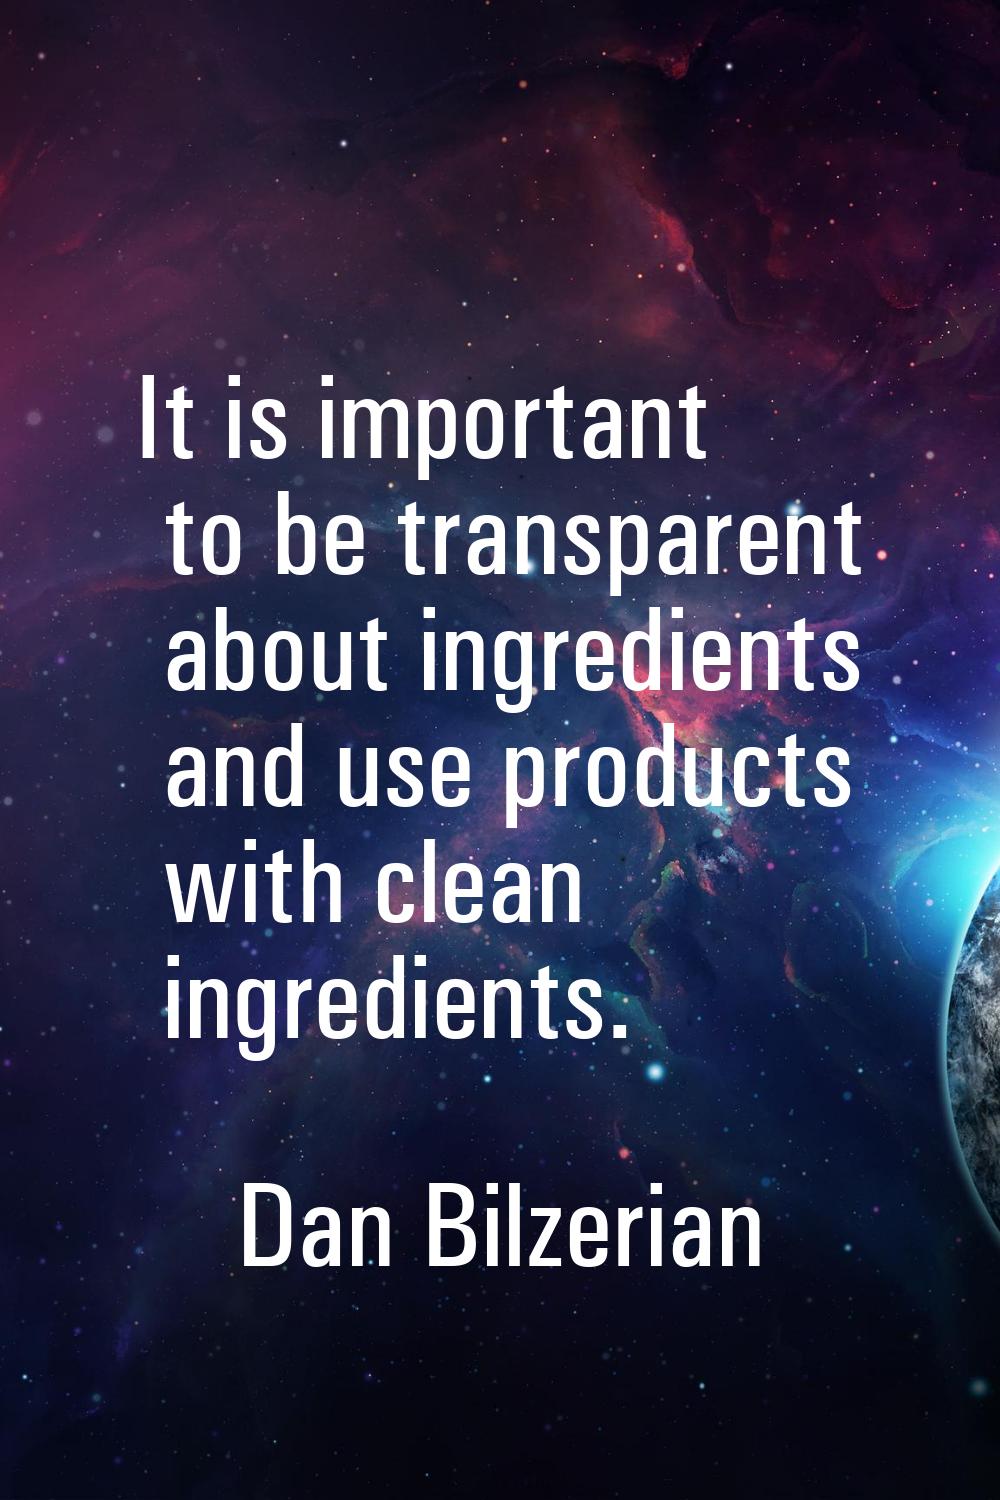 It is important to be transparent about ingredients and use products with clean ingredients.